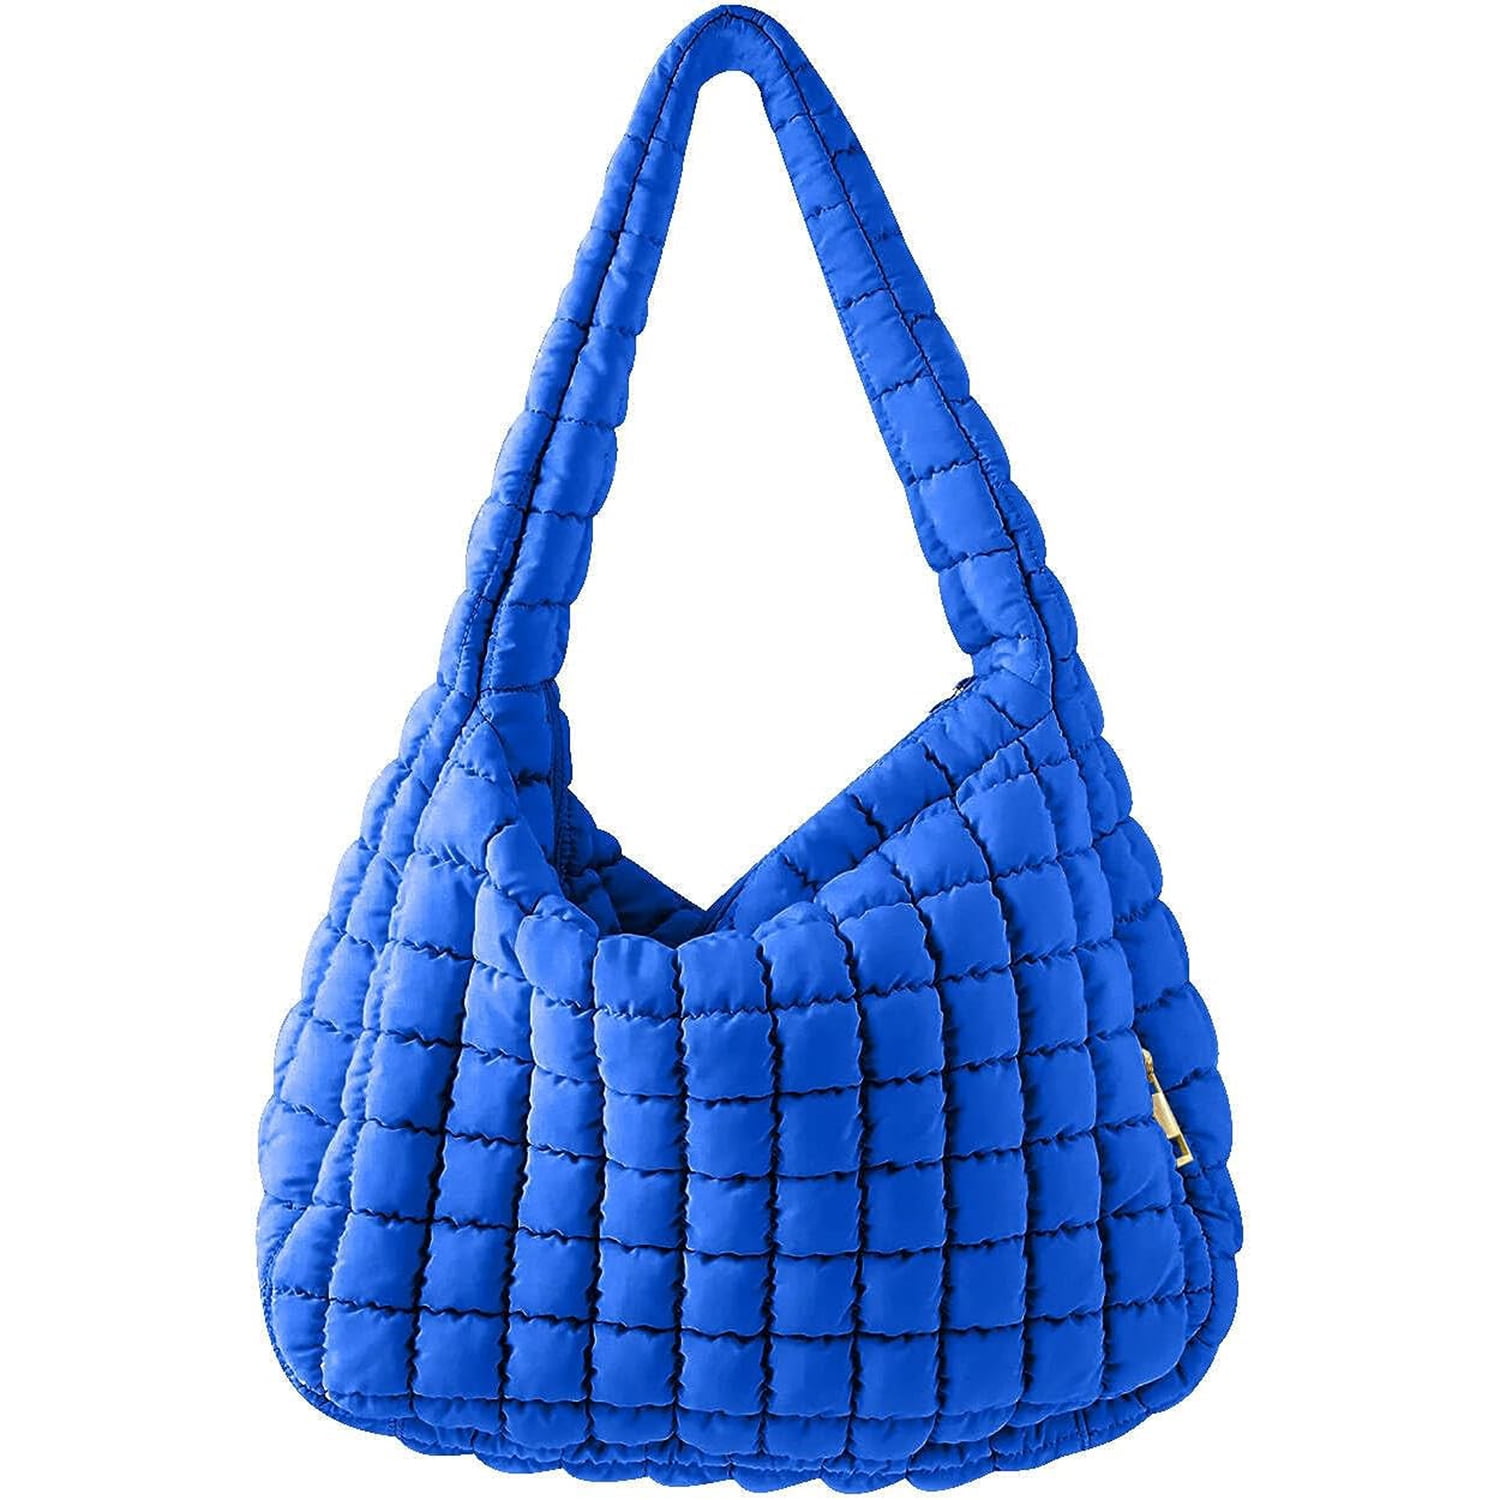 Buy SAKRIT COLLECTION STYLISH BLUE HAND BAG PU Leather Gorgeous, attractive  and classic in design ladies purse, latest Trendy Fashion side Sling Handbag  for Women and girls, woman purse, purse woman bag